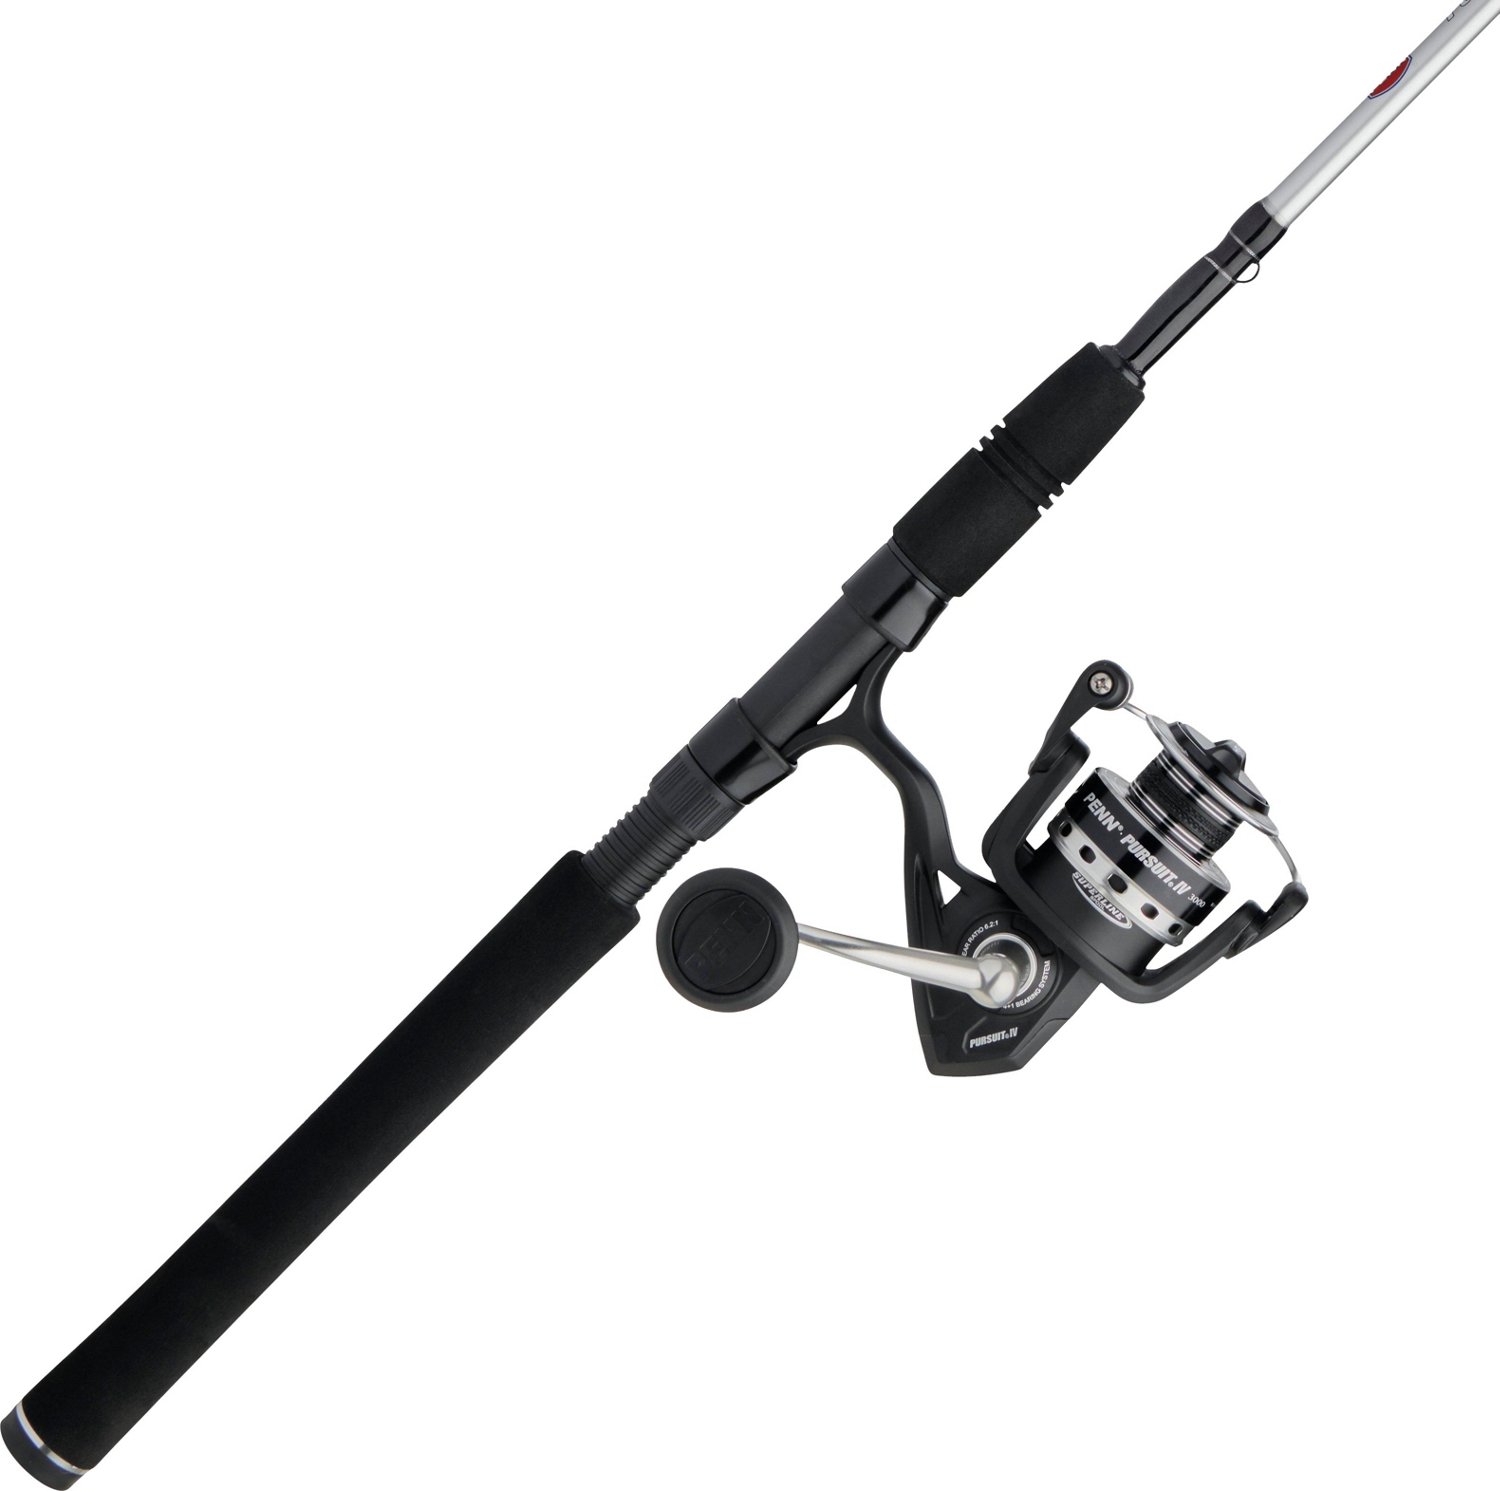  Cadence CC5 Spinning Combo Lightweight with 24-Ton